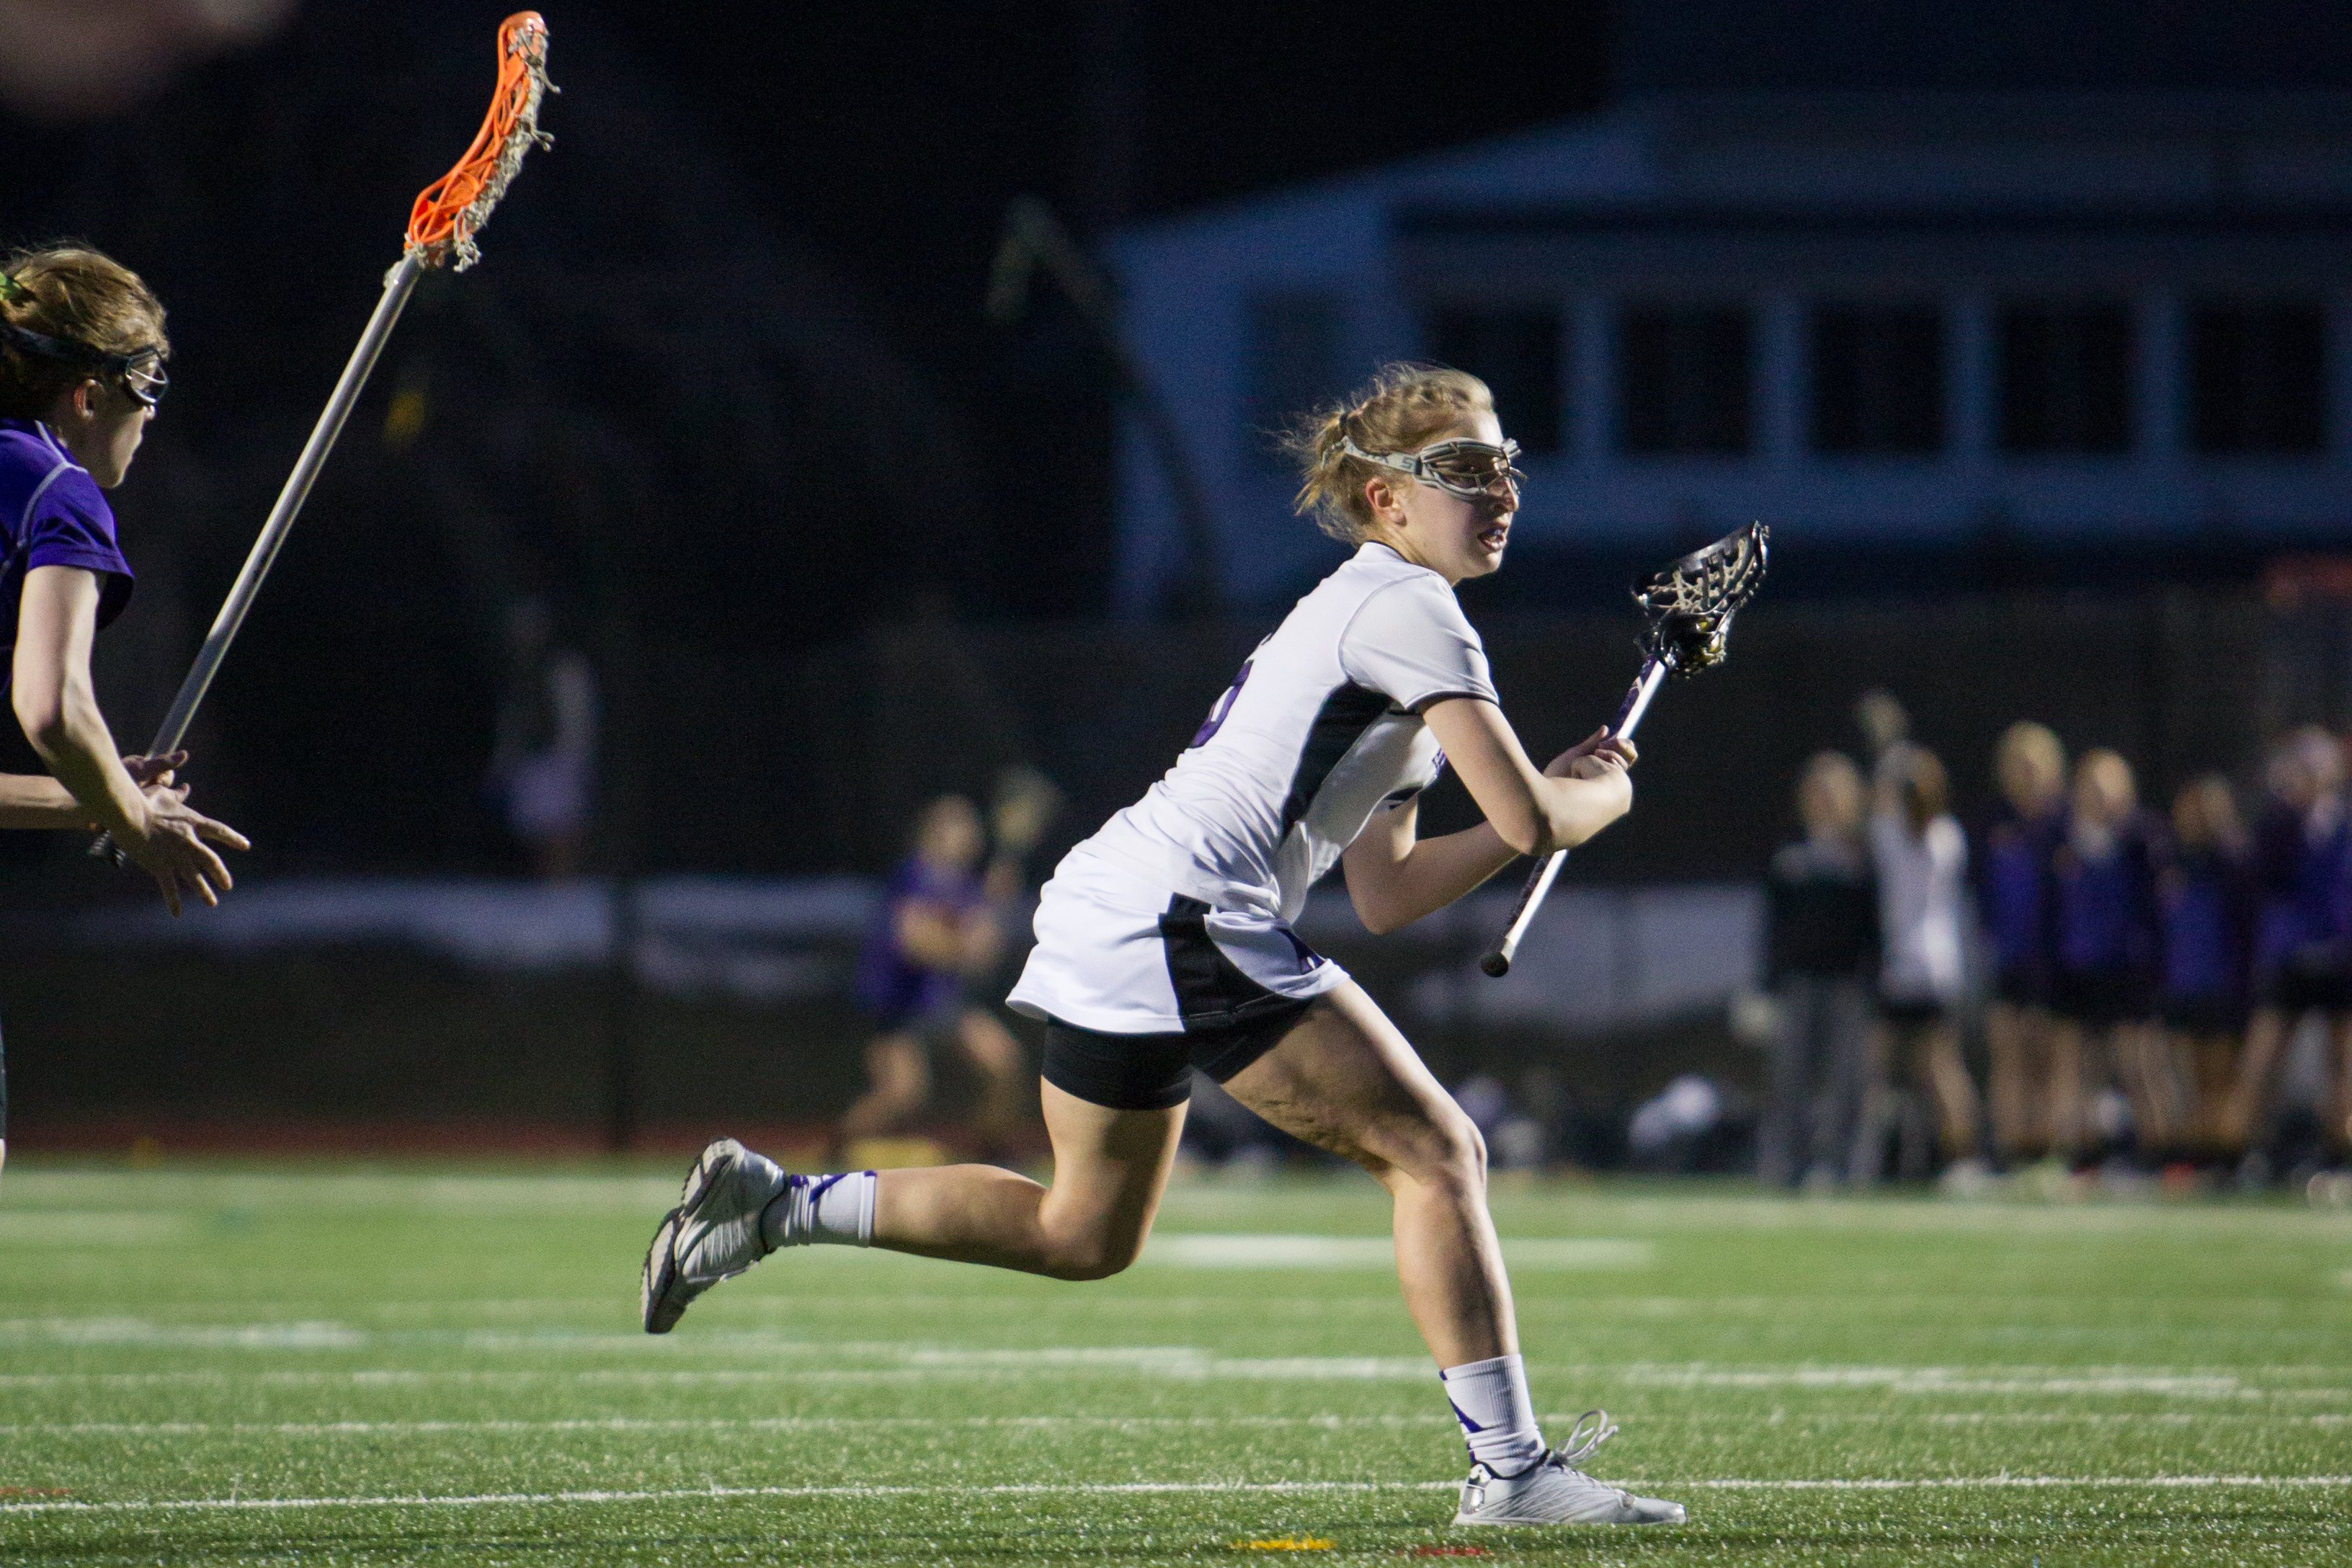 Women's Lacrosse Sweeps Two Games Over Spring Break Trip The Amherst